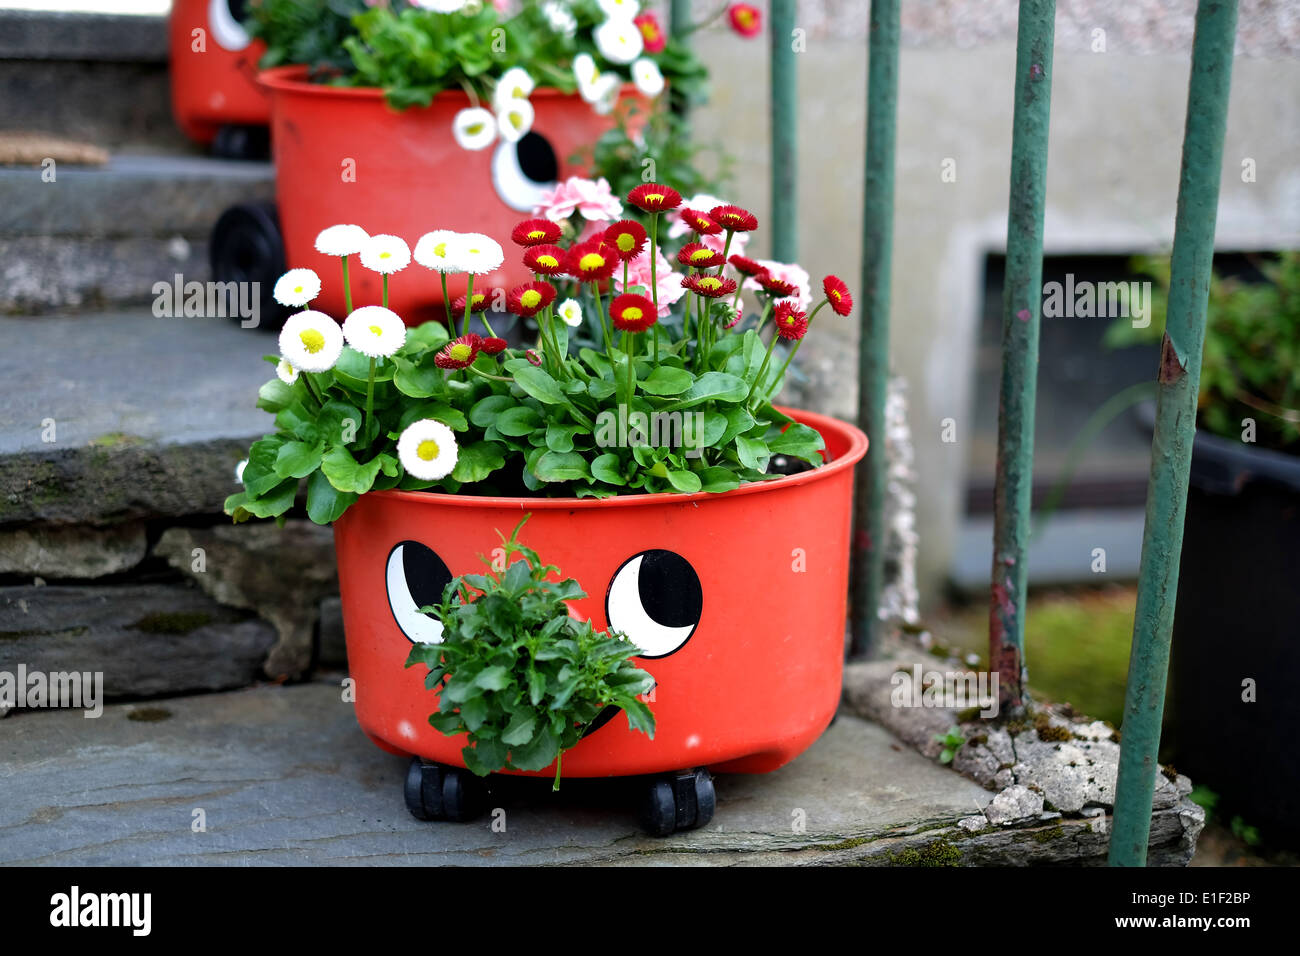 Henry vacuum cleaner used as a plant pot Stock Photo